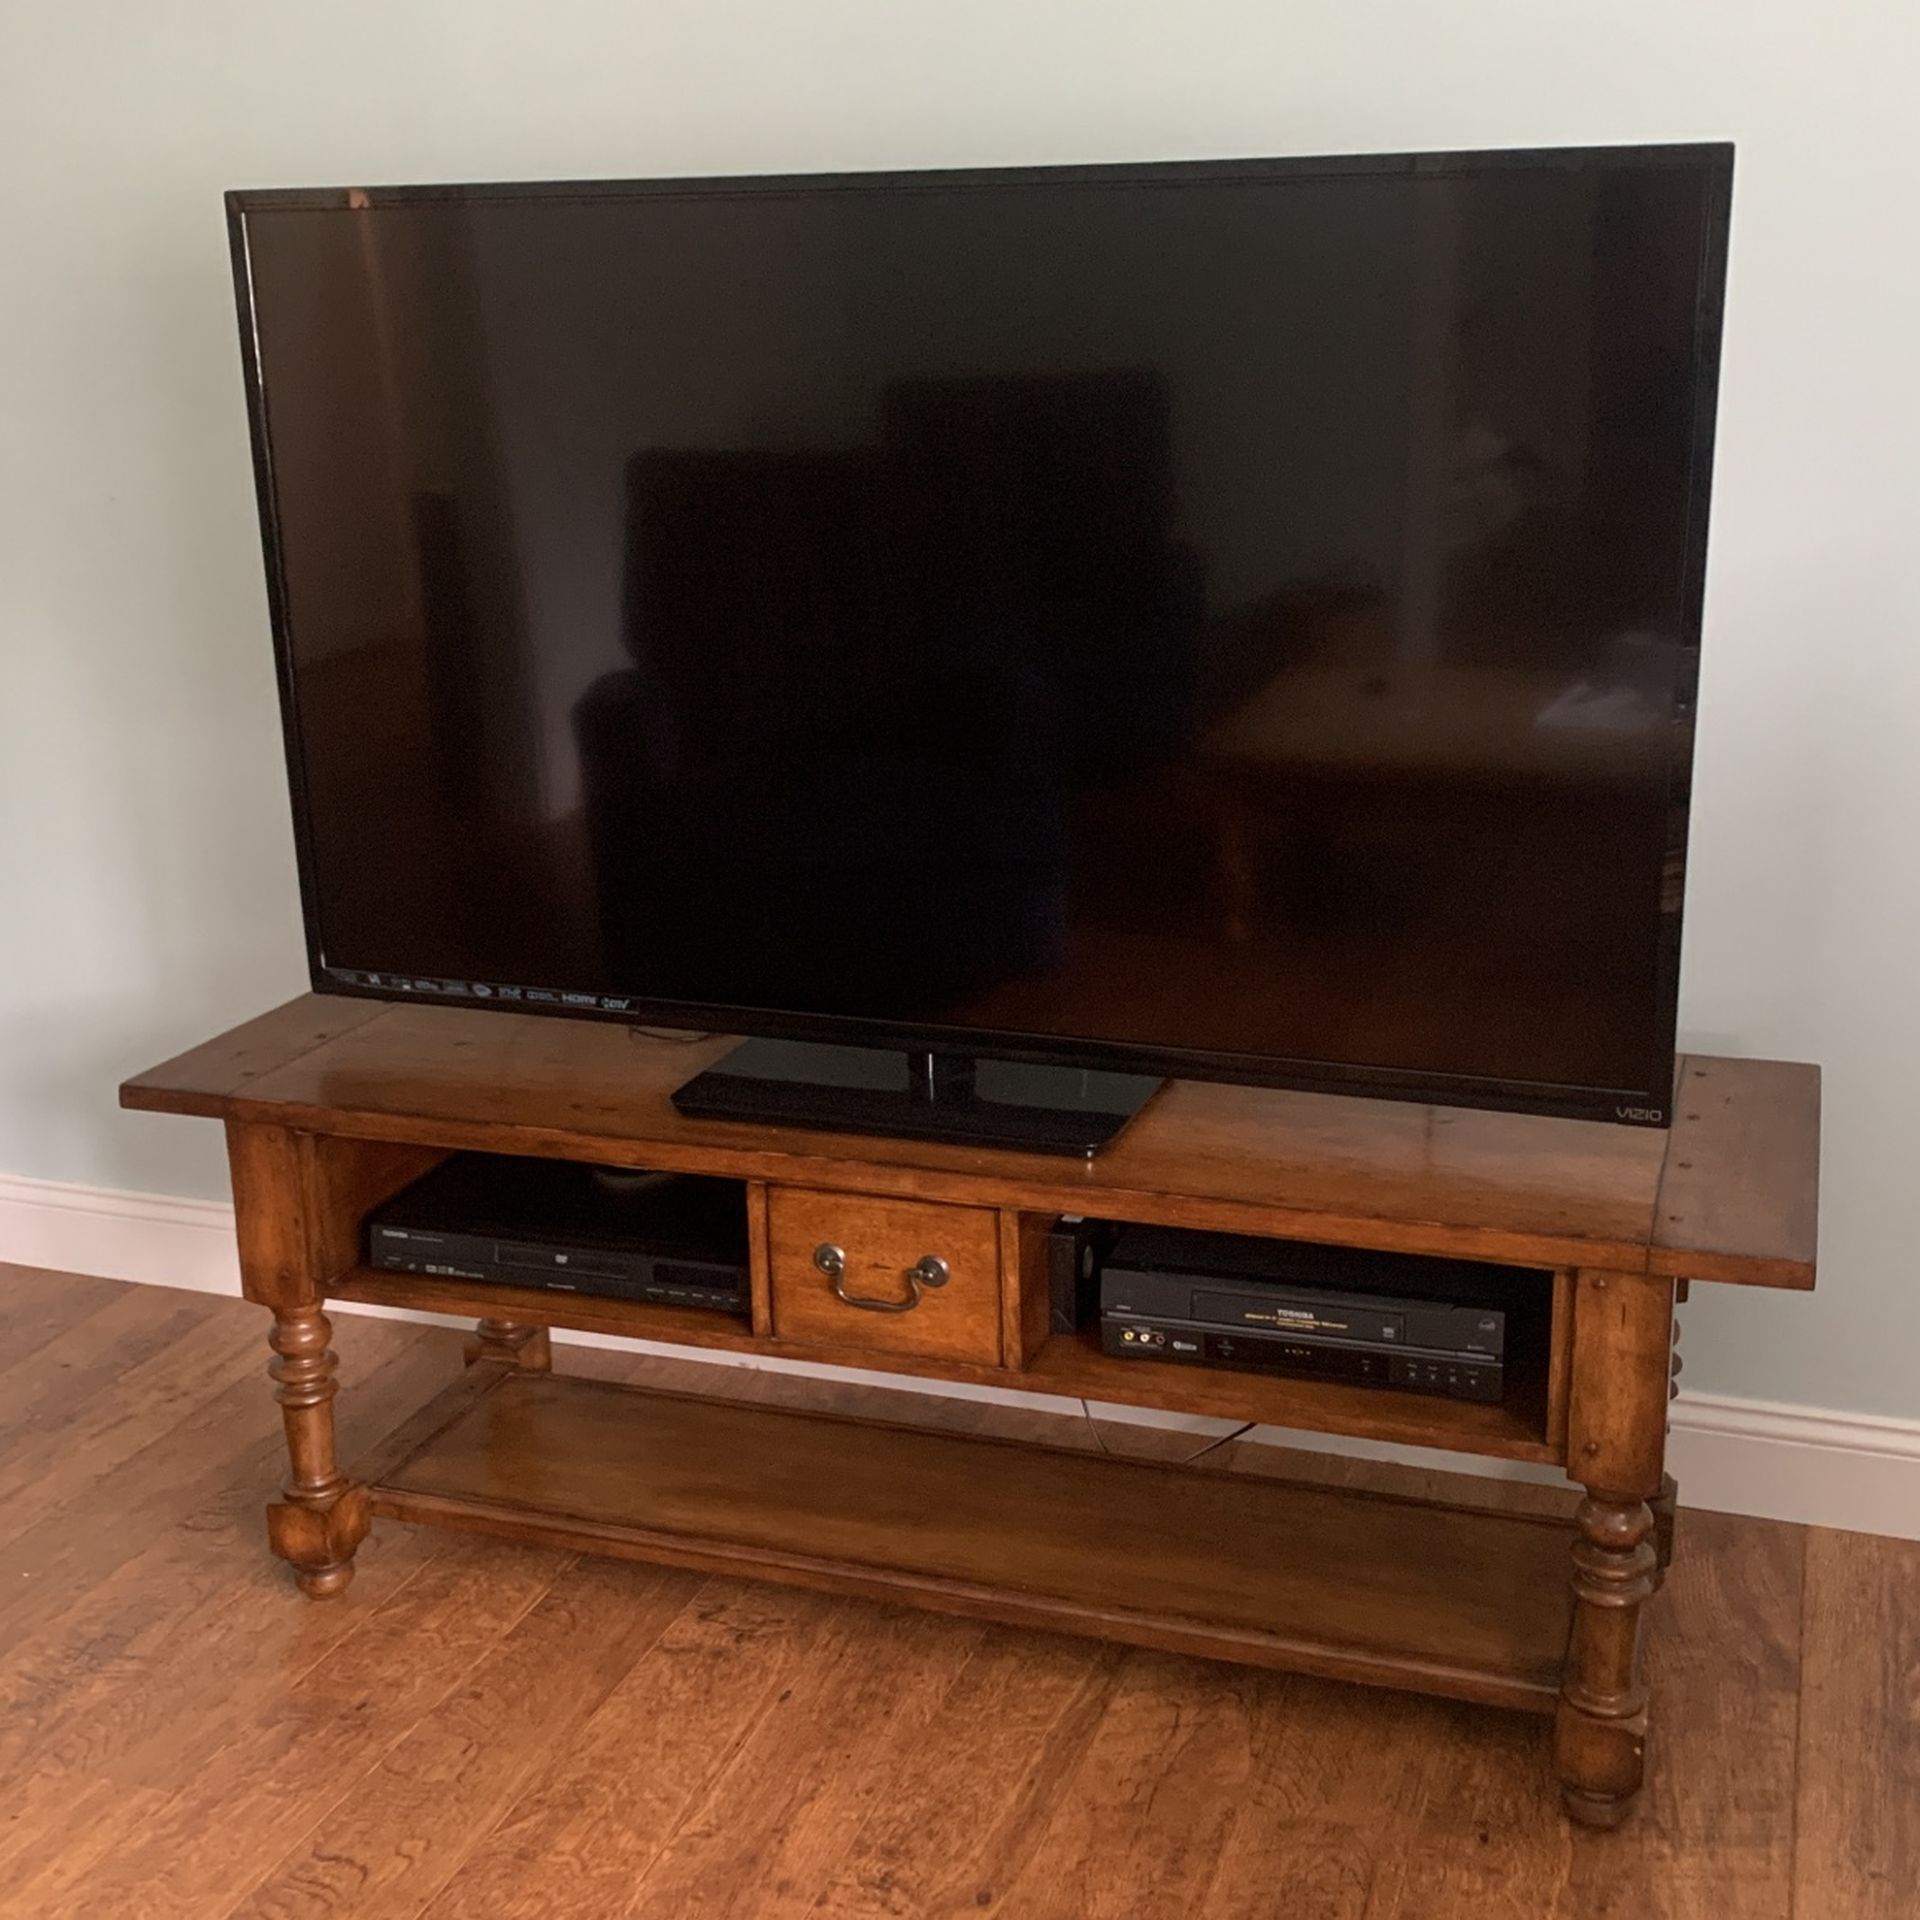 Pottery Barn TV Stand